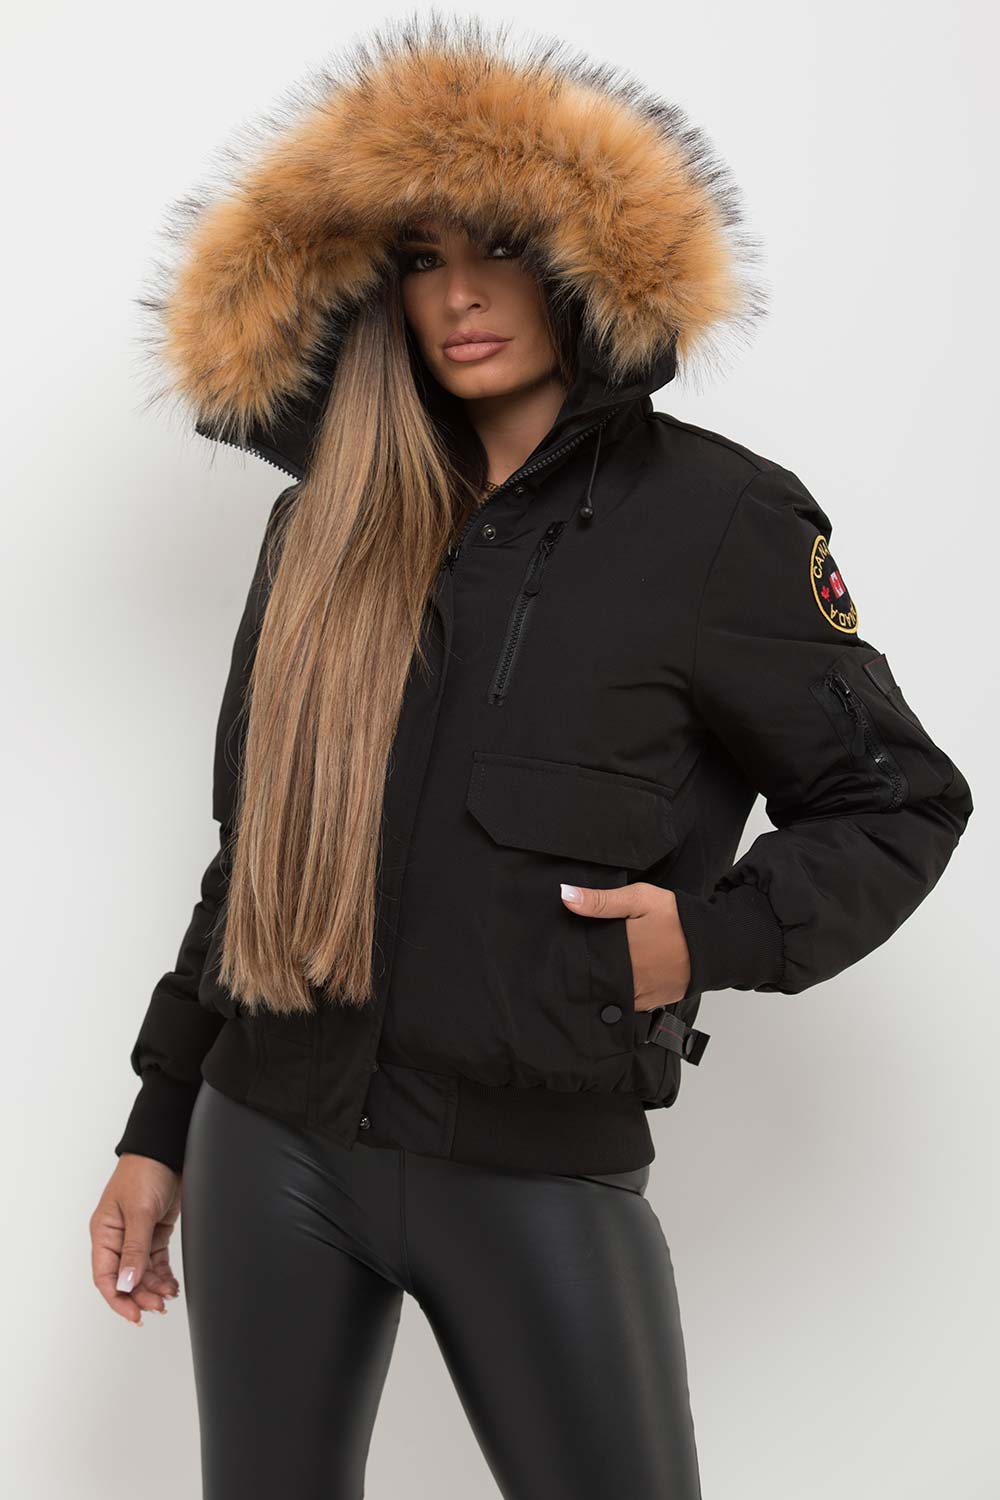 Women's Black Bomber Jacket With Fur Hood Canada Goose Inspired ...